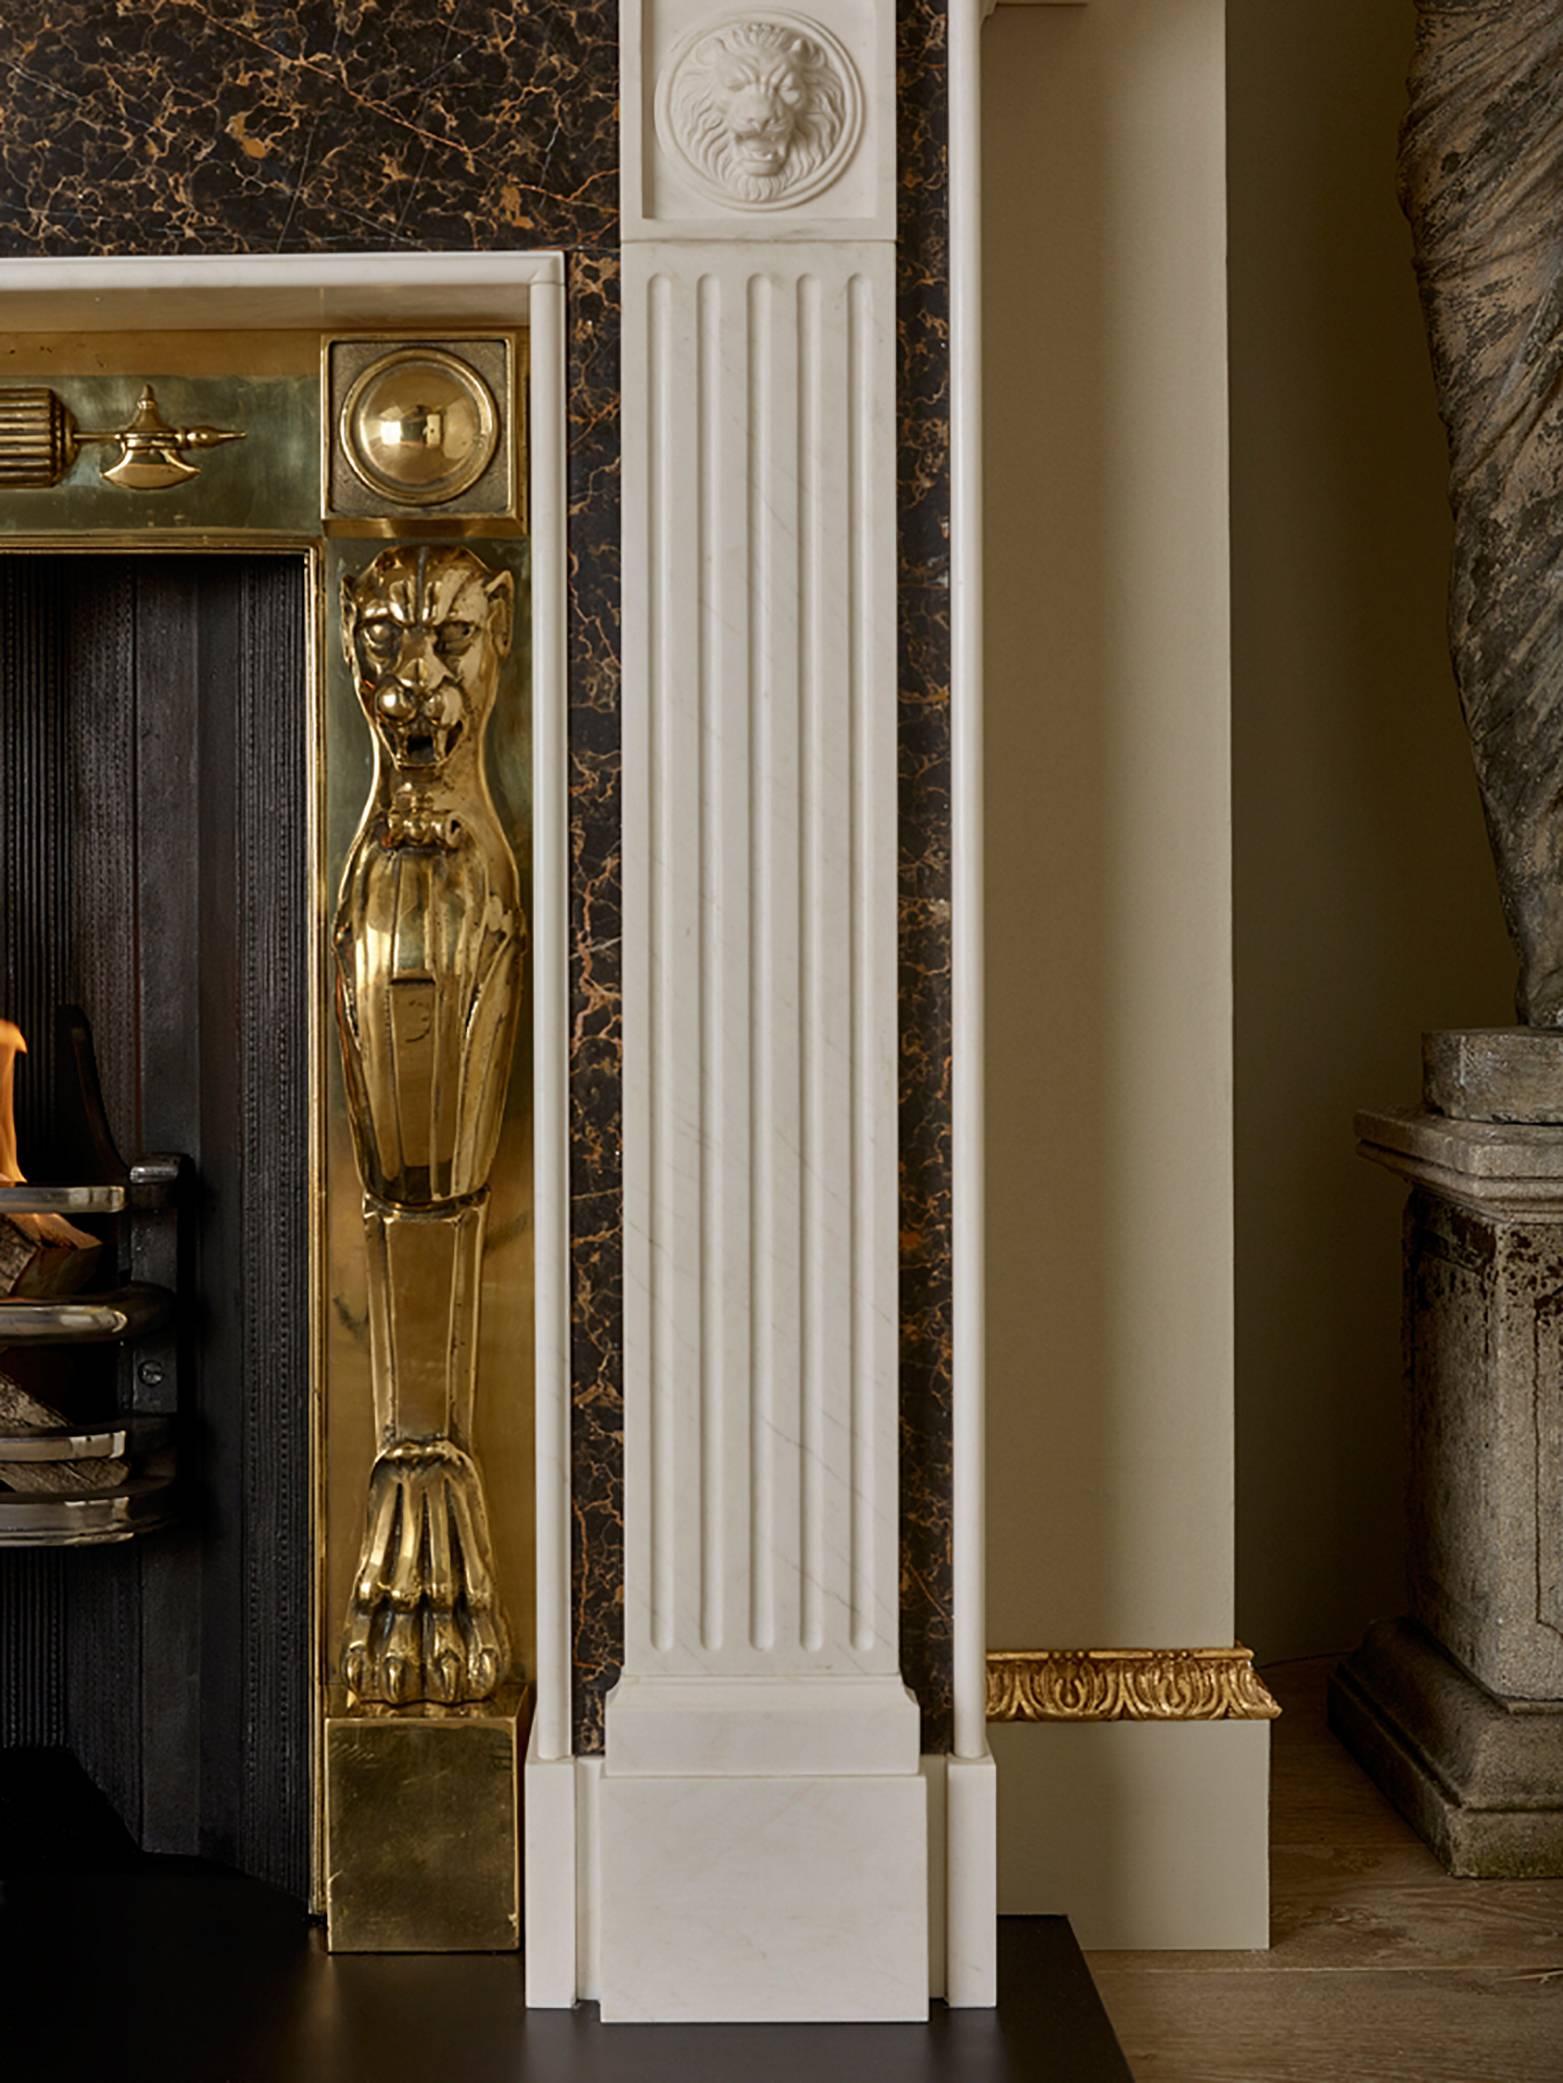 Inspired by the Grand Tour, the renowned British furniture and interior designer Tim Gosling has created this dramatic mantel and register grate for Chesney’s.

The Rome mantelpiece features finely carved Lion masks in the corner blocks and fluted